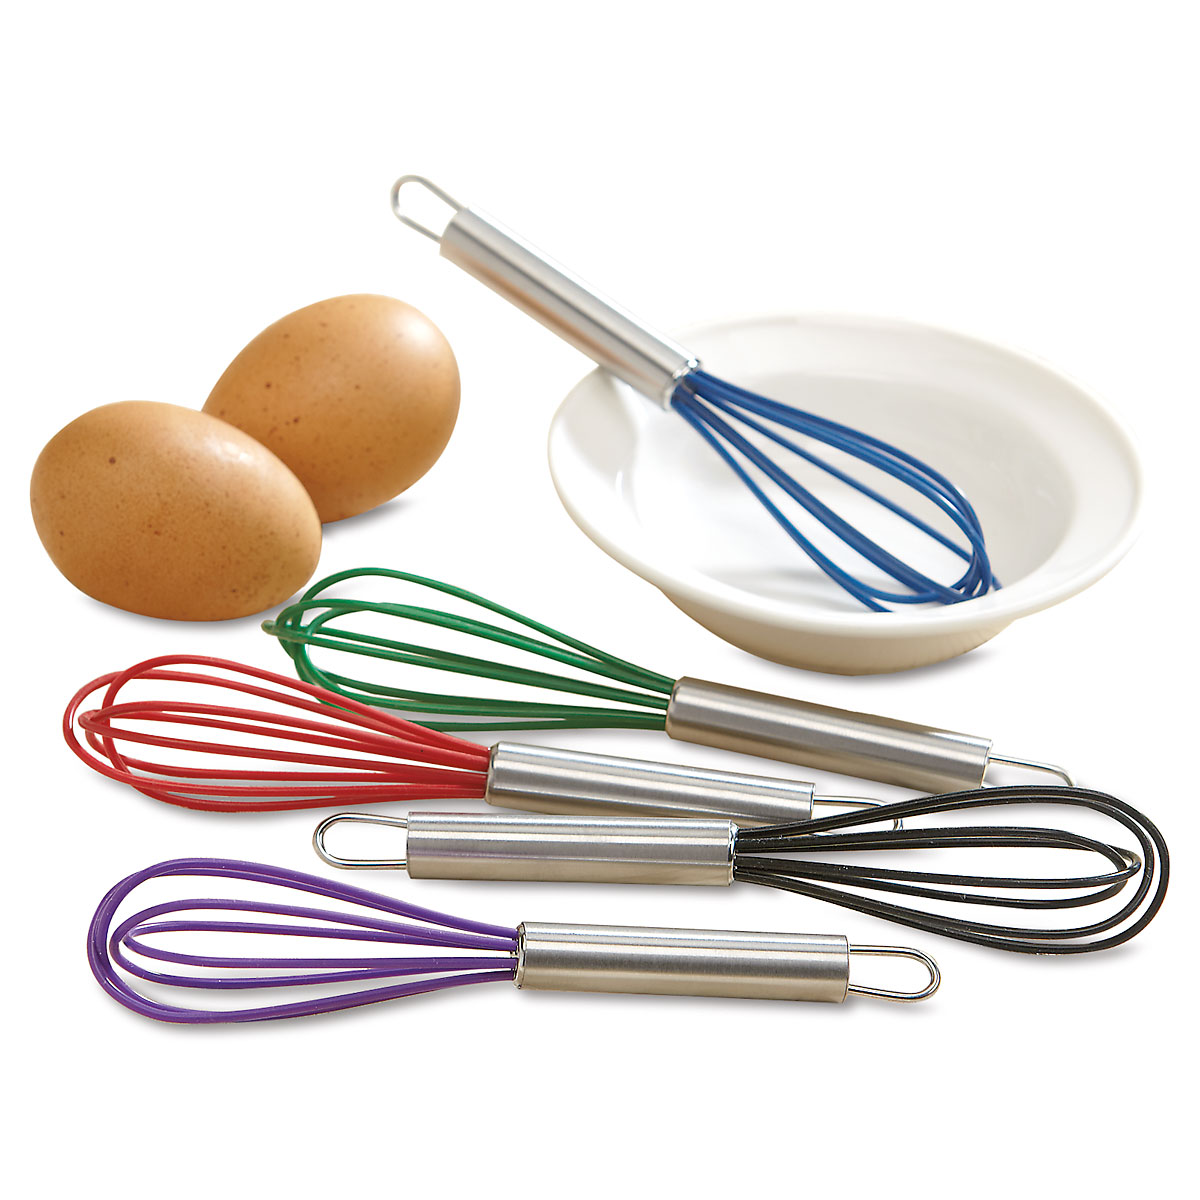 Gir Premium Platinum Silicone Steel Mini Whisk For Cooking Mint Green Color